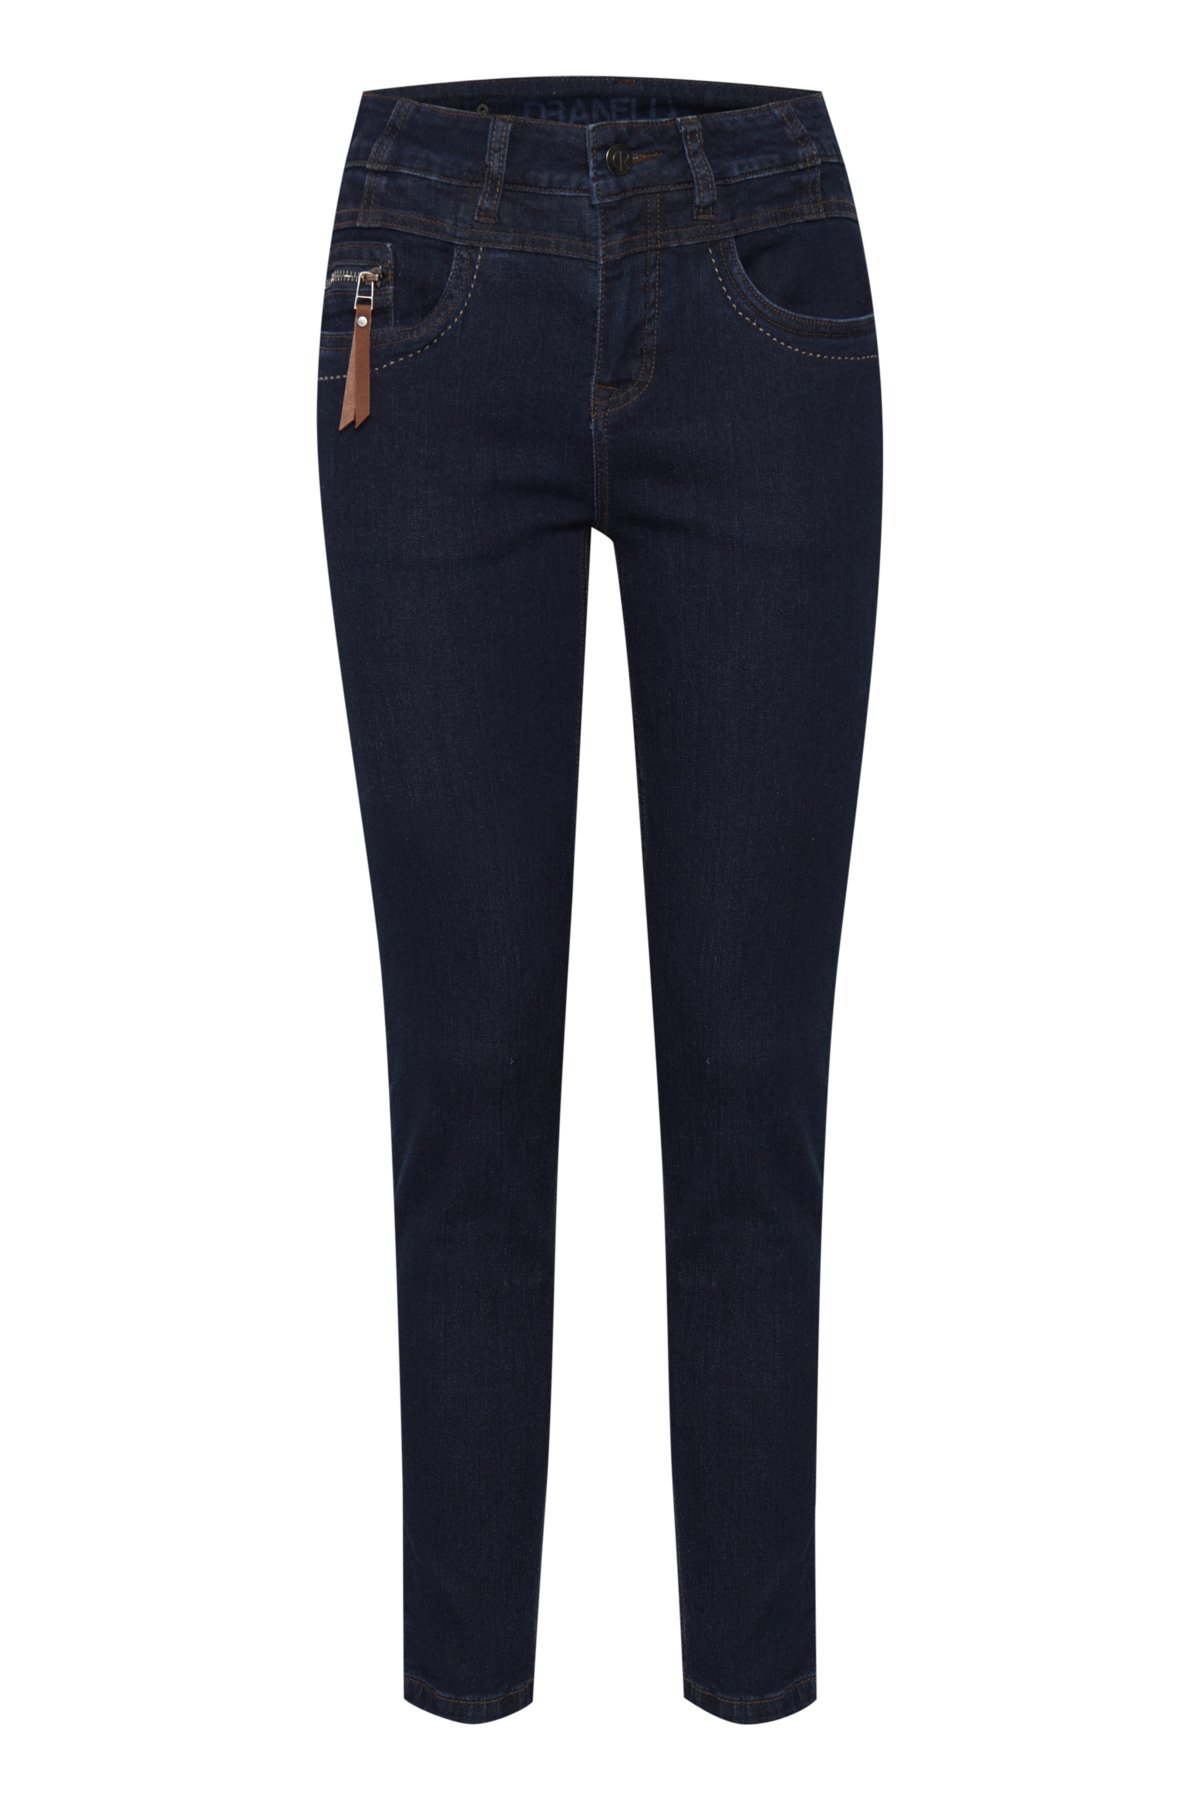 Dranella Drtora Jeans - Jeans - By Haugsted